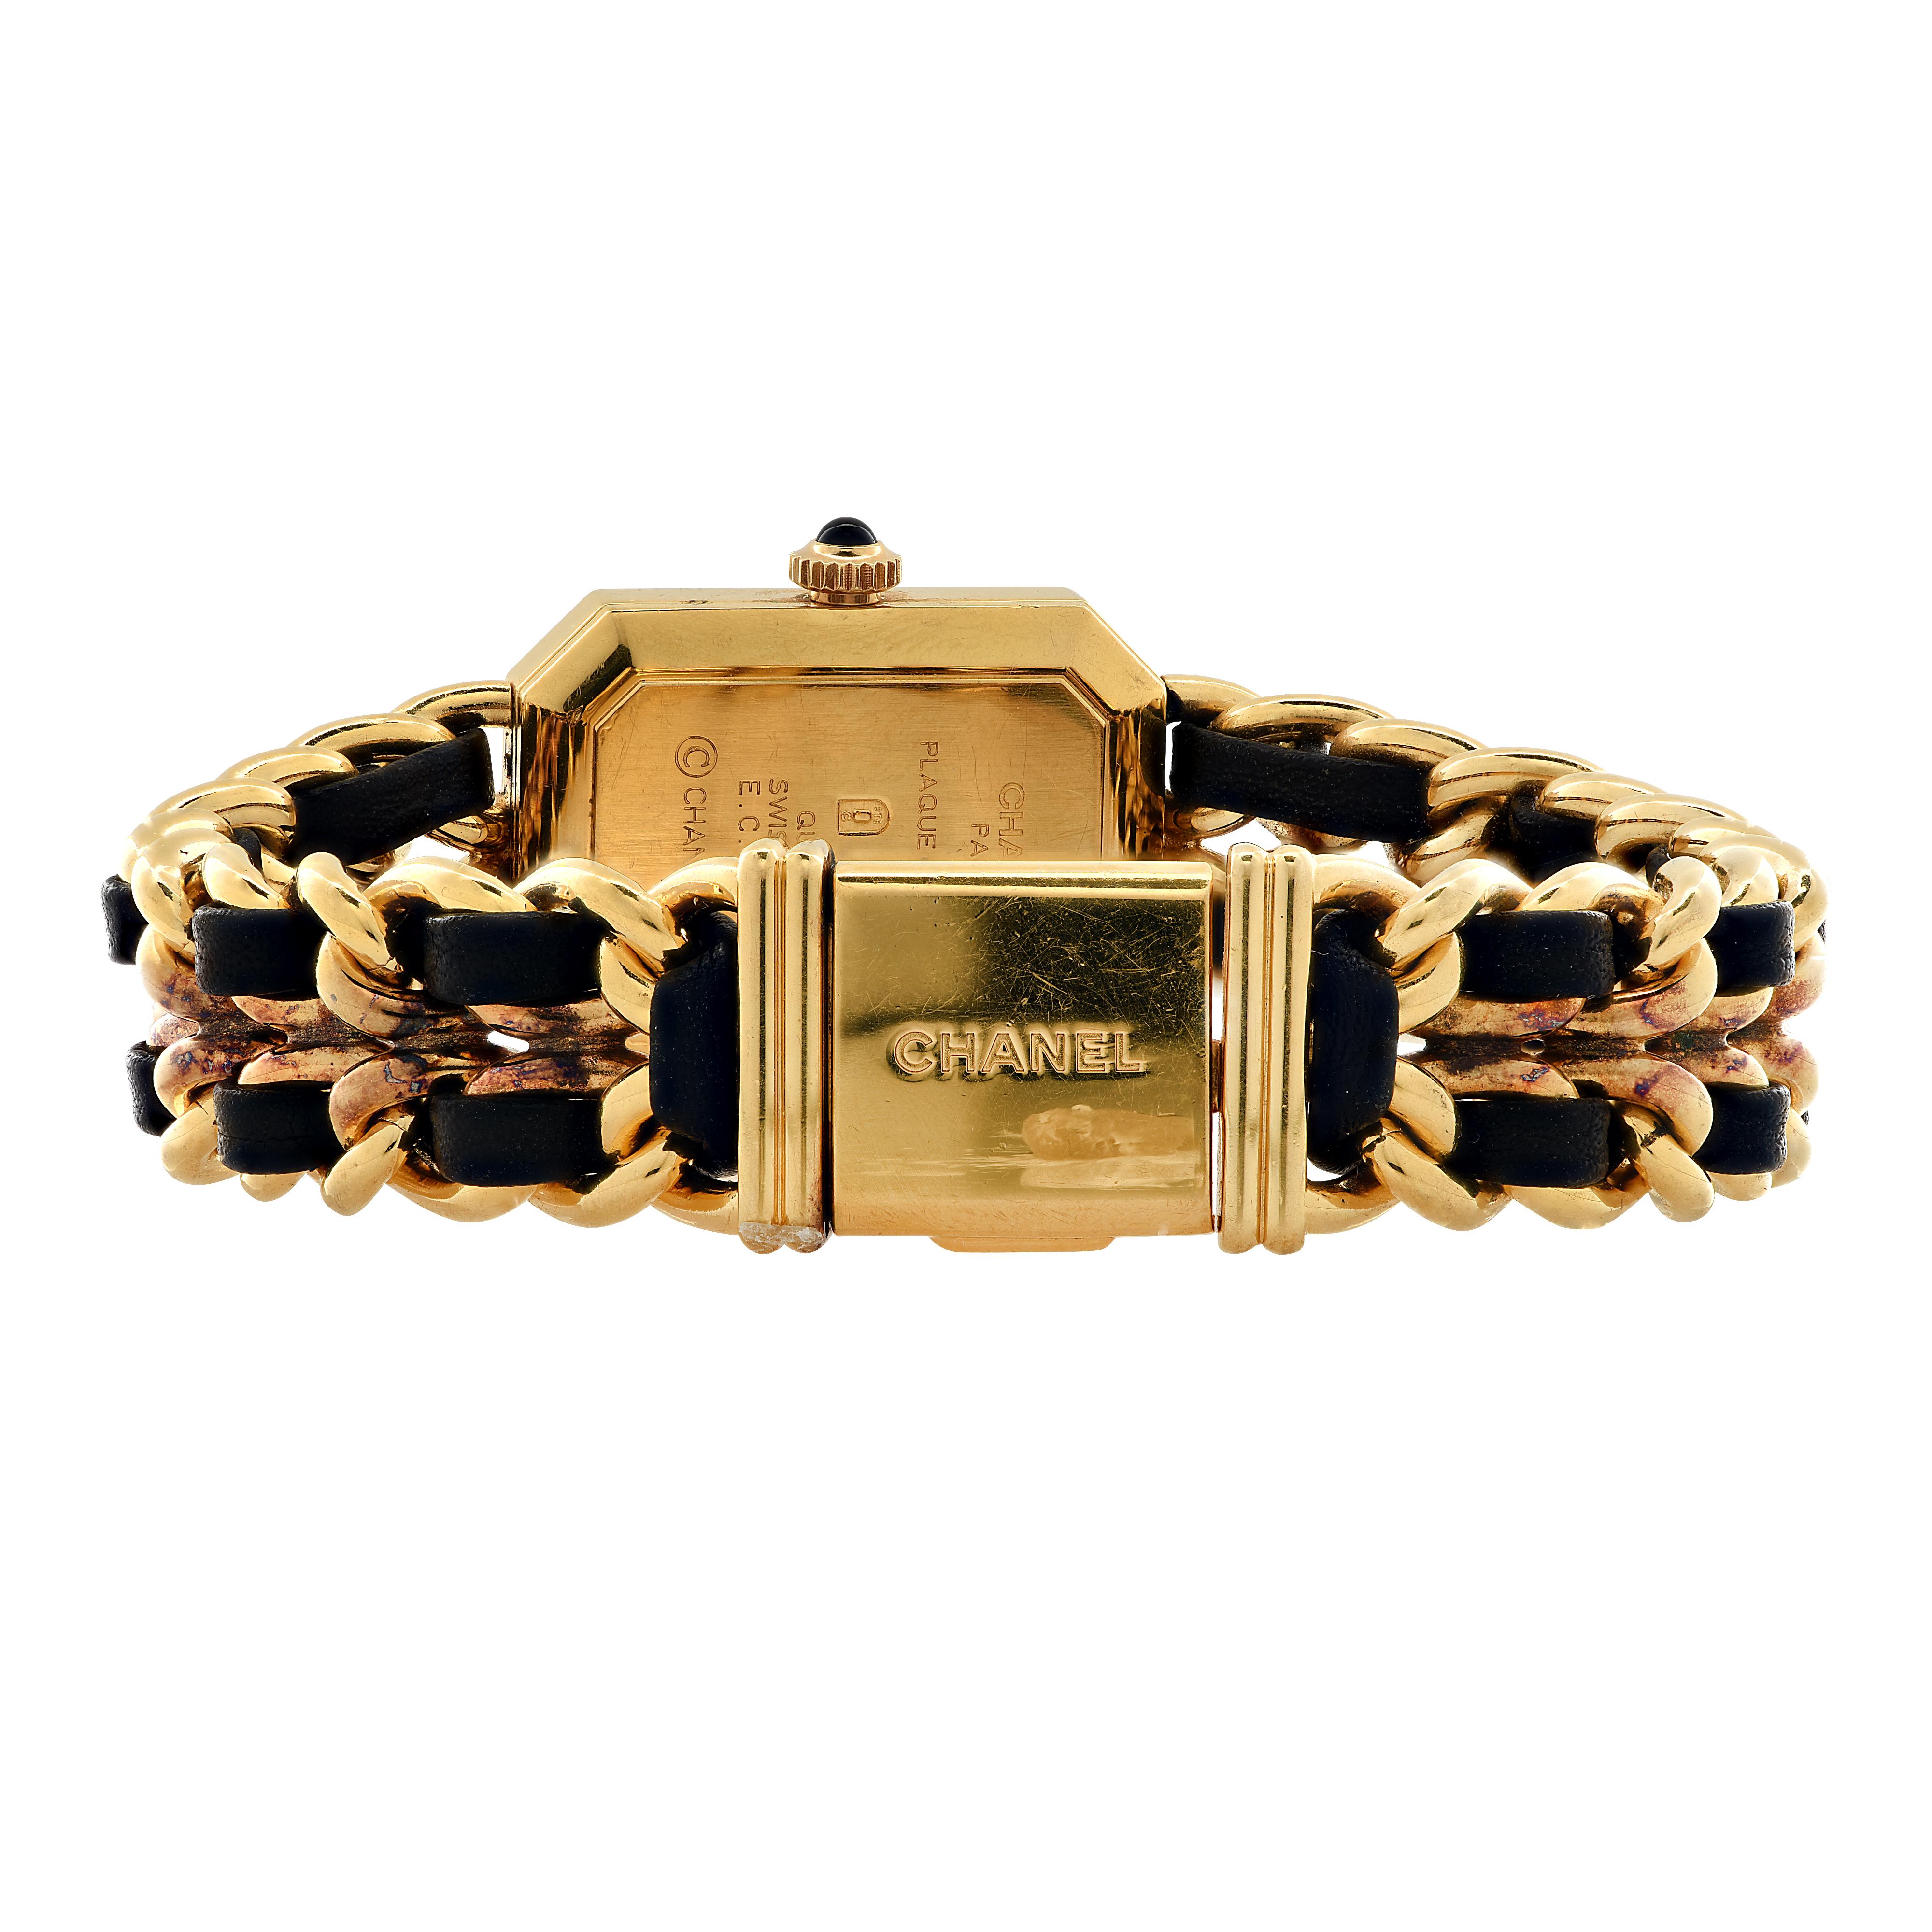 Chanel vintage Premiere Rock ladies’ quartz movement wristwatch. The links of the bracelet are gold plated, interwoven with black leather, and measures .45 inches in width and 7 inches in length. This swiss made watch features a black dial with gold